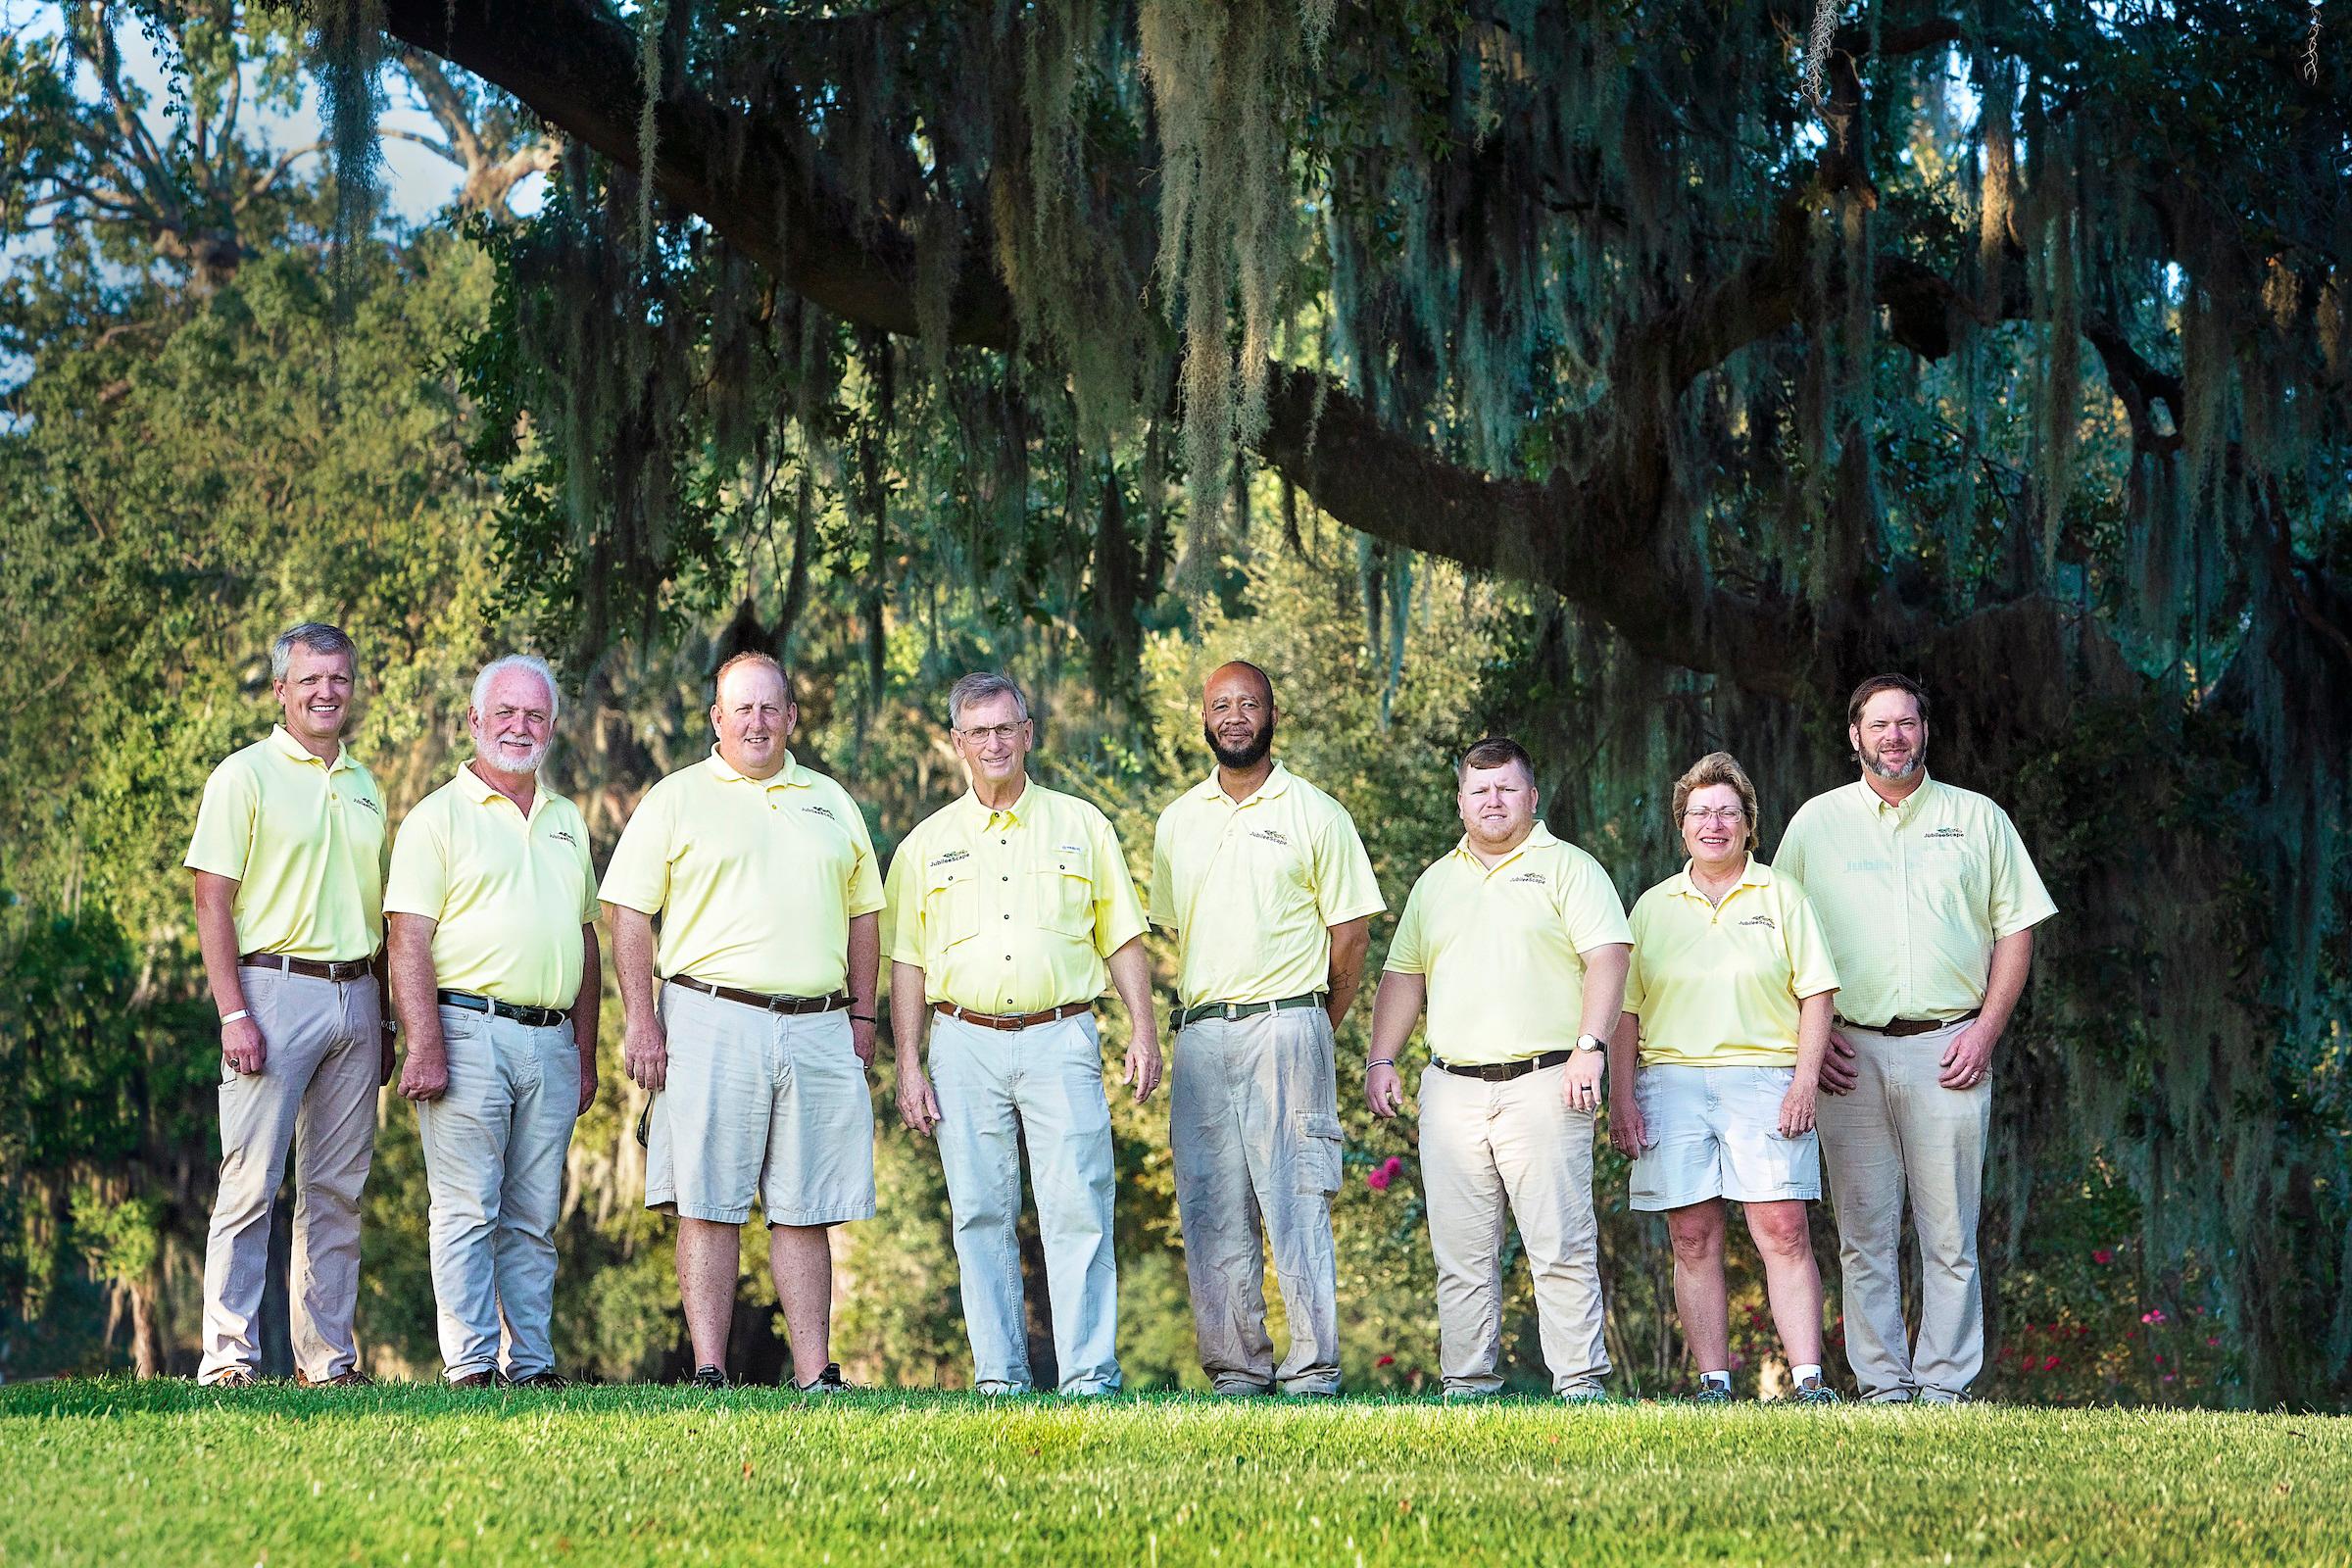 The JubileeScape team of Impression-Makers - serving Mobile, Daphne, Point Clear, Montrose, Fairhope, Orange Beach, Gulf Shores, Perdido Key, Coastal Mississippi and Northwest Florida  
Left to Right: David Schmohl, Dave Paton, Ronnie Gauthier, President Robin Luce, Kelvin Essex, Jeremy Lazzari, Jan Blackerby and Chad Blake